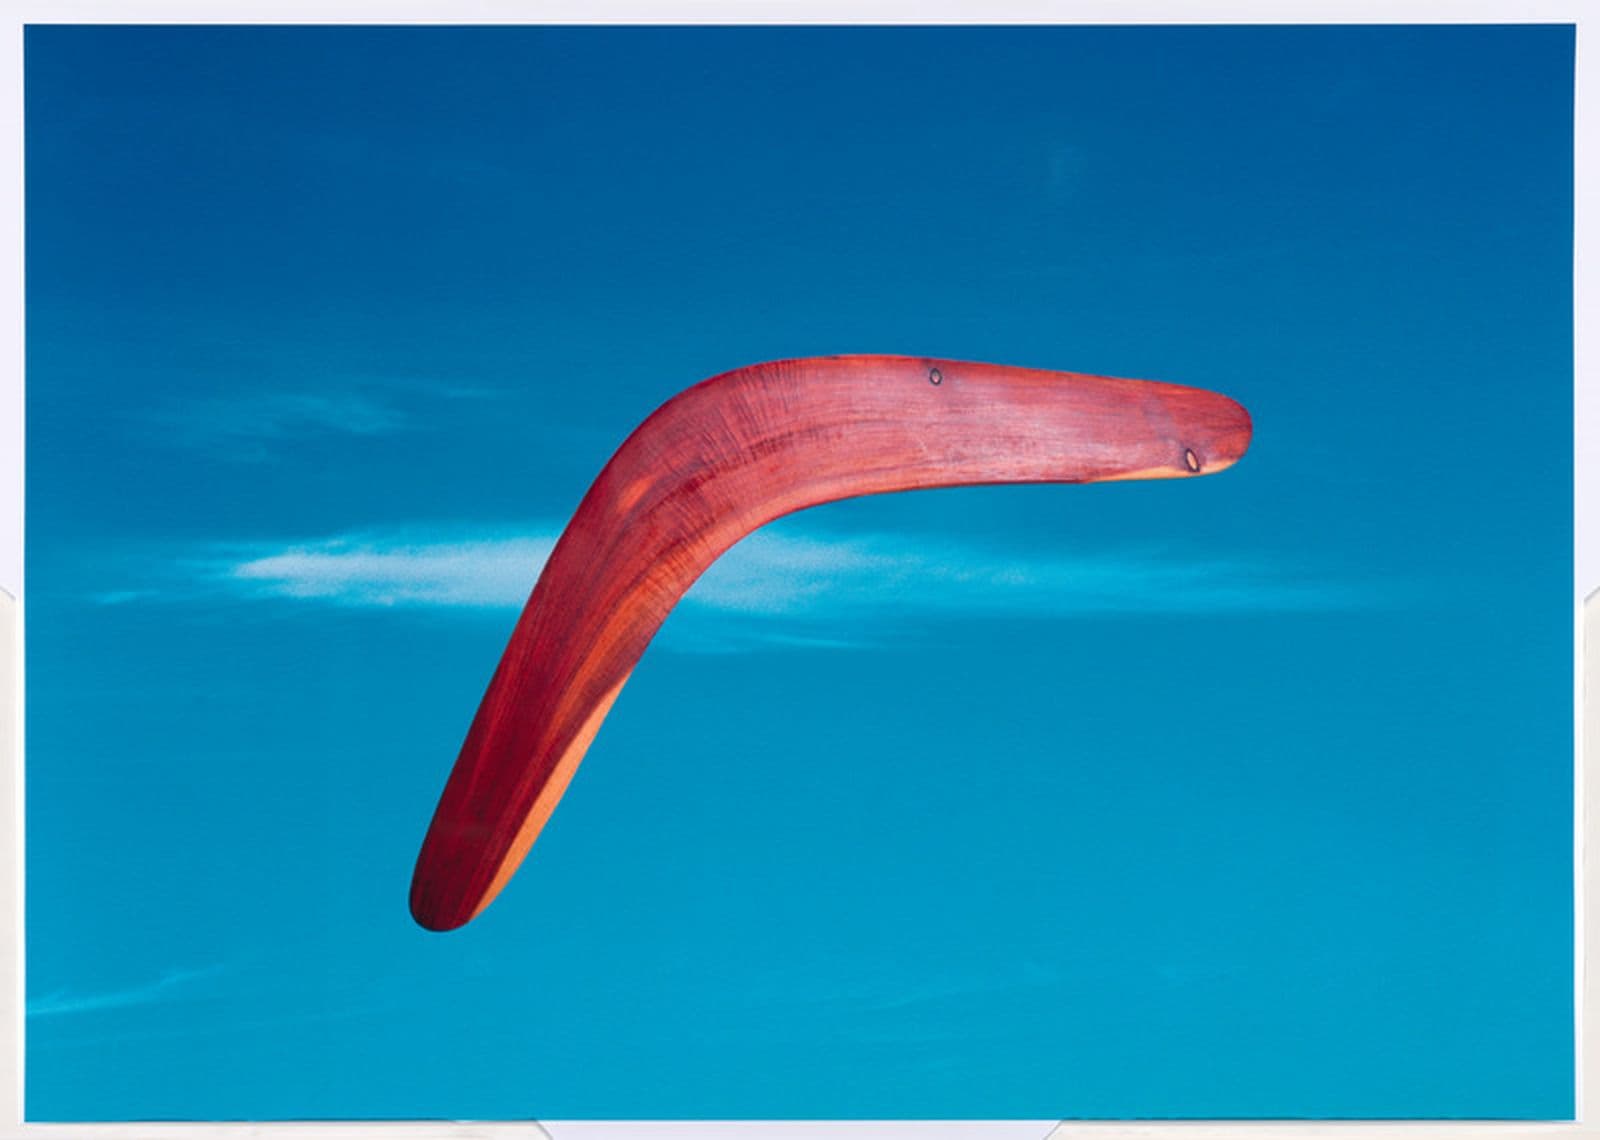 A red timbre boomerang is flying through a bright blue sky